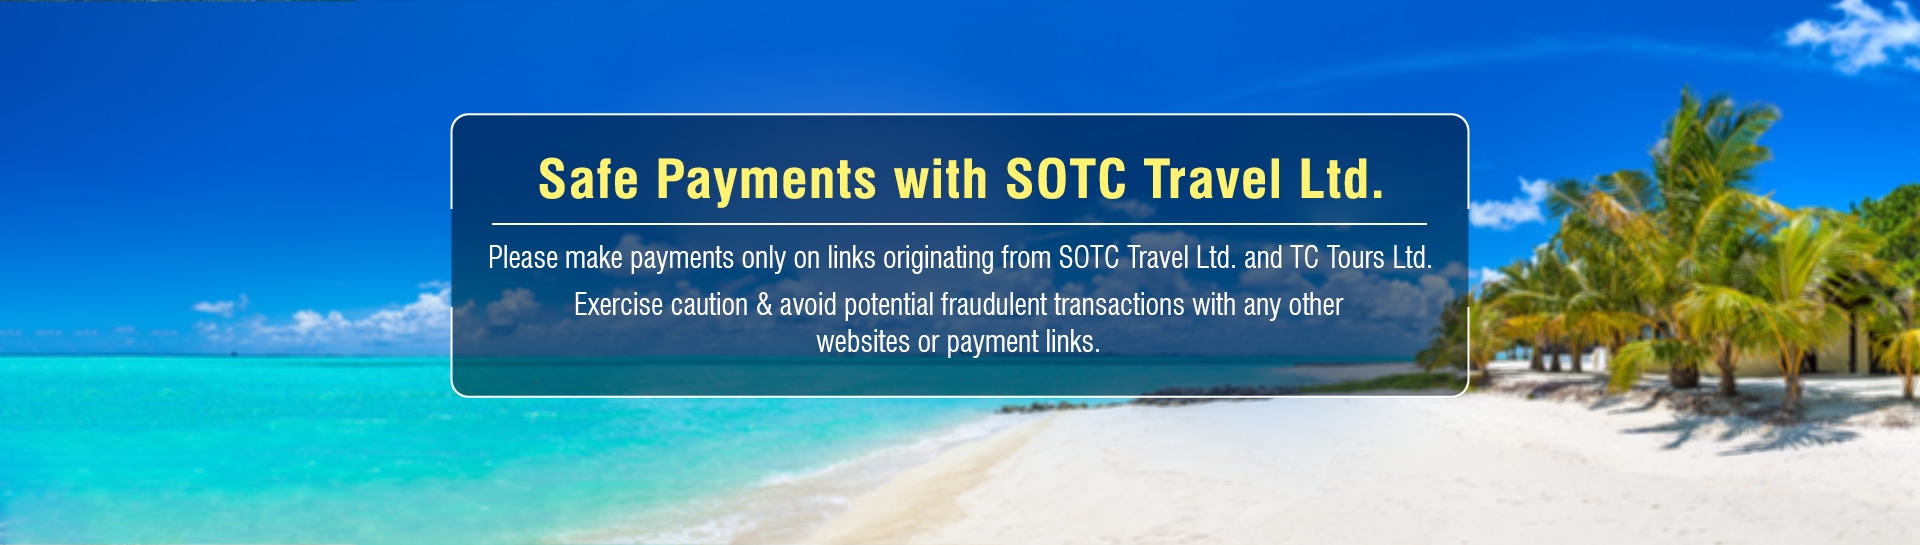 Safe Payments with SOTC Travel Ltd.